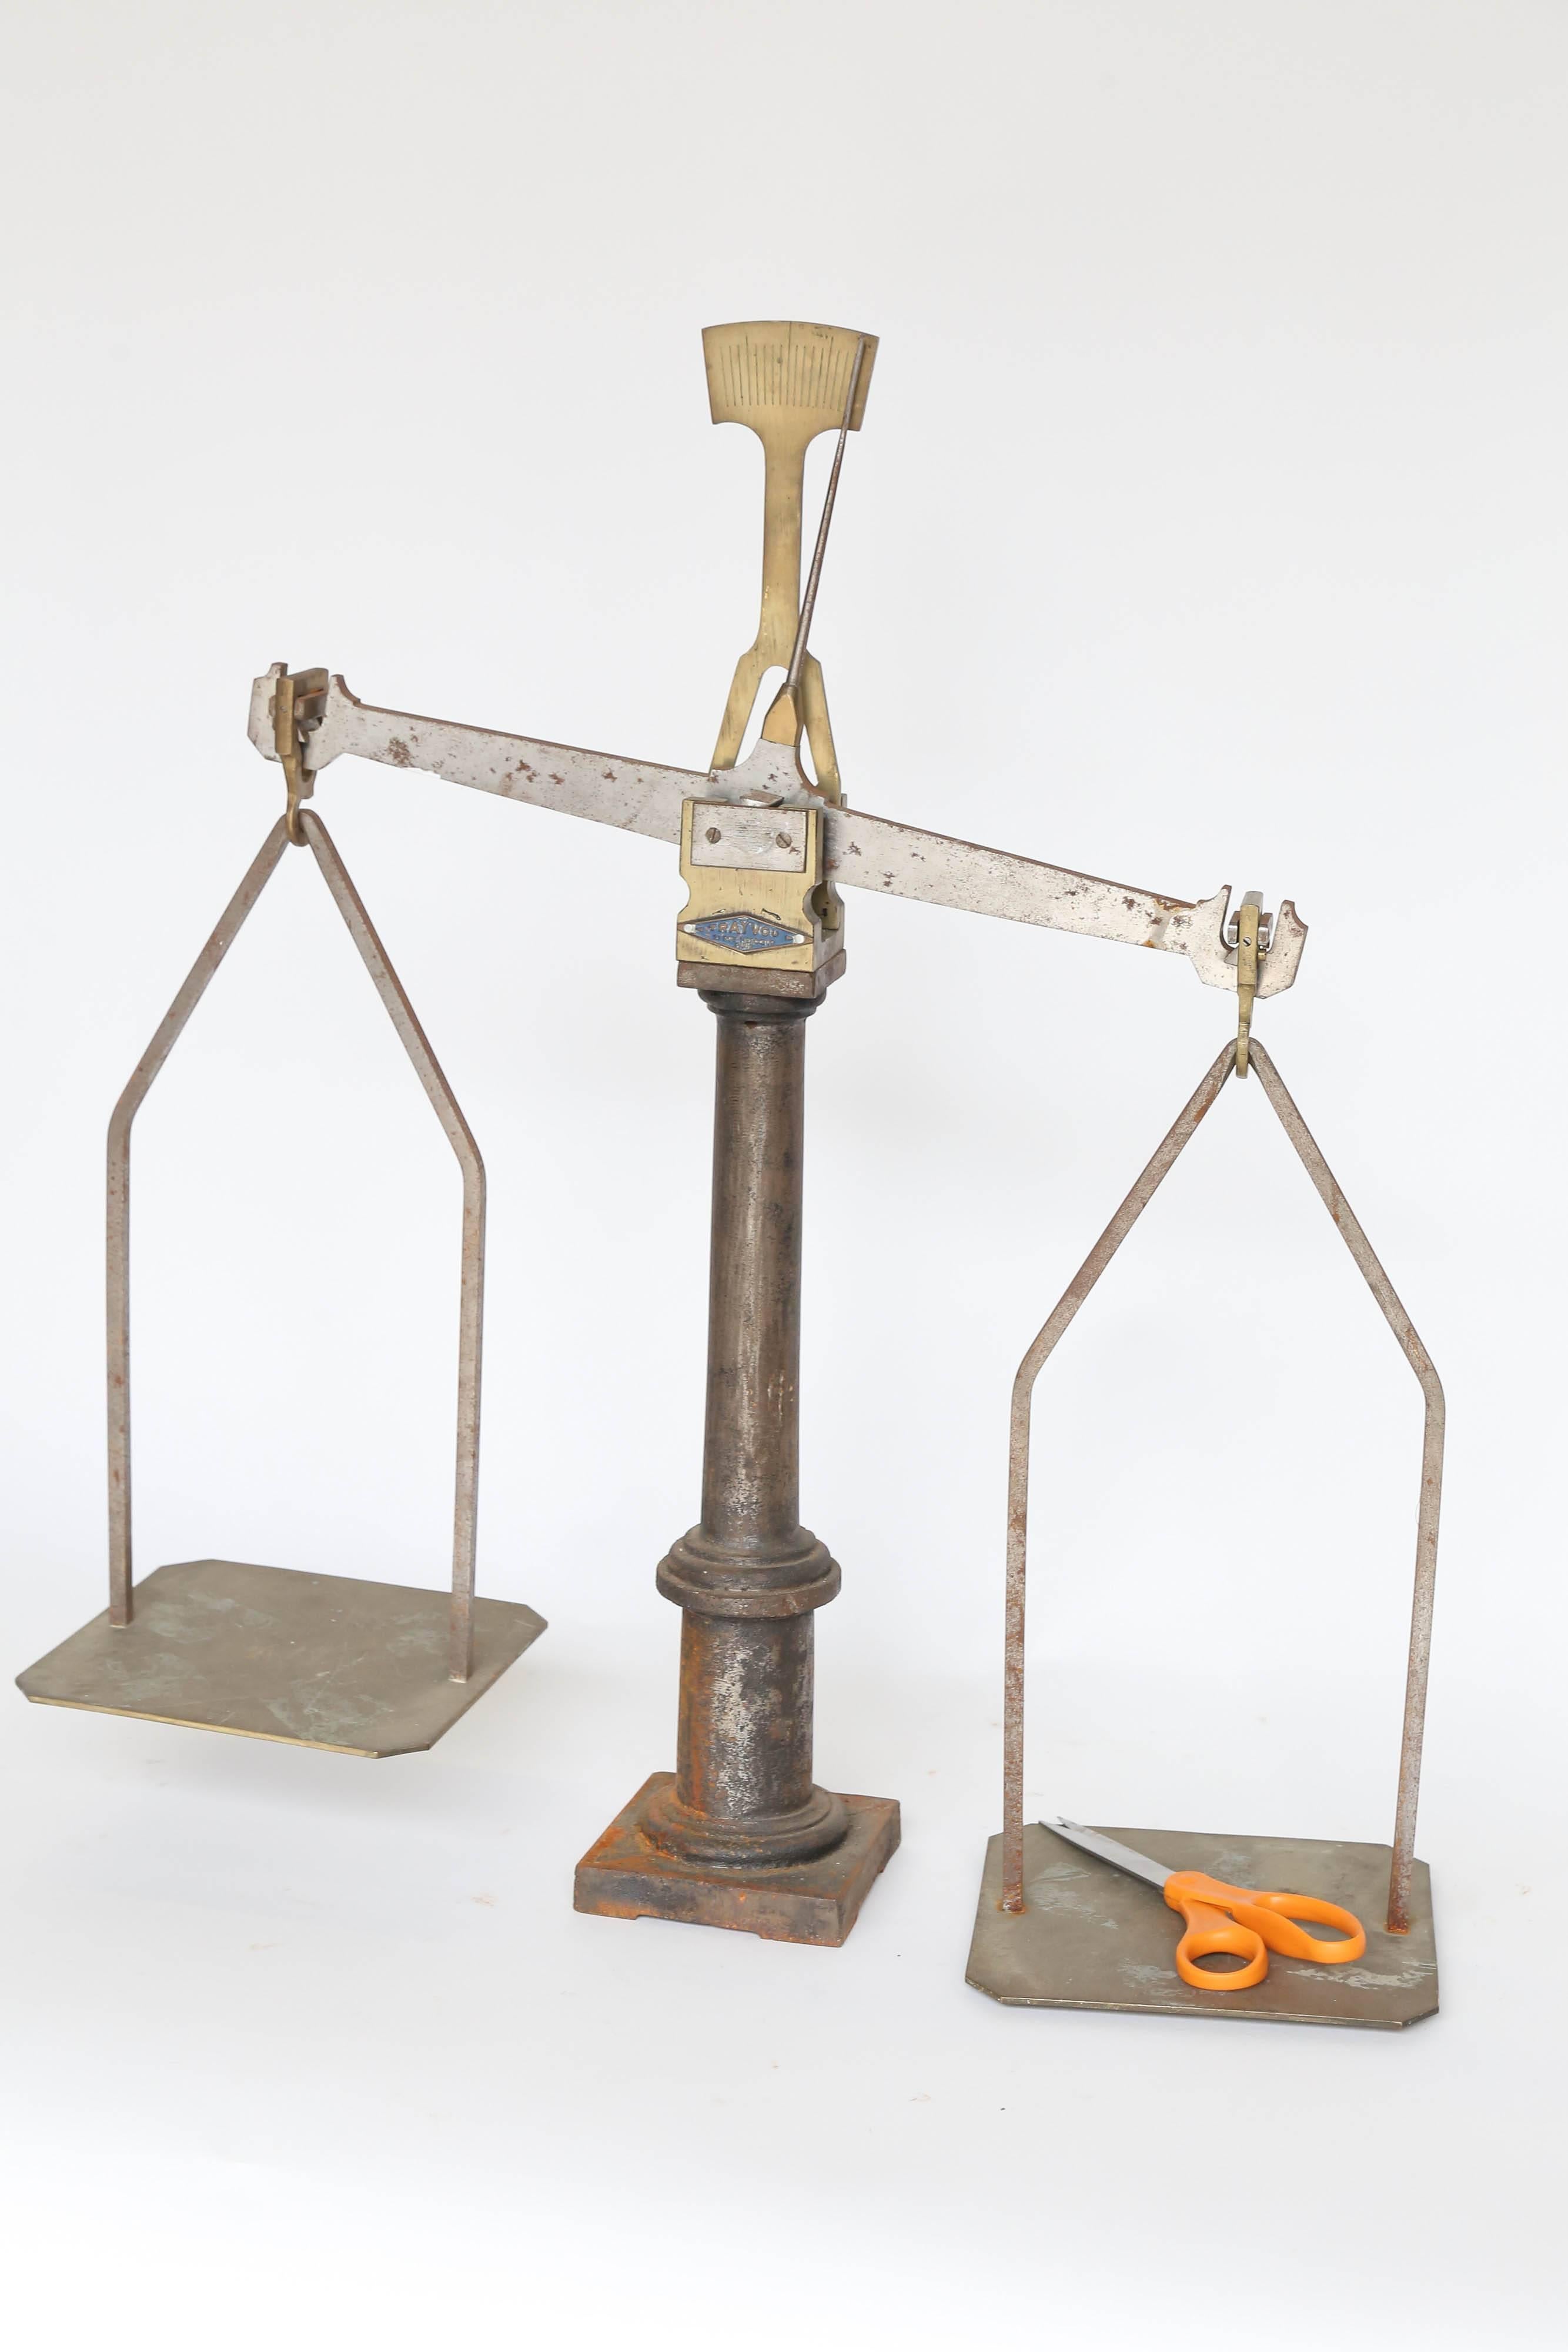 An iron and brass equal-arm scale from the Trayvou Company of Paris and Lyon. The heavy iron pillar supports a steel balance beam with brass fittings and a brass pointer with balance marker. The two brass pans are 7 inches by 7.75 inches. Use it as